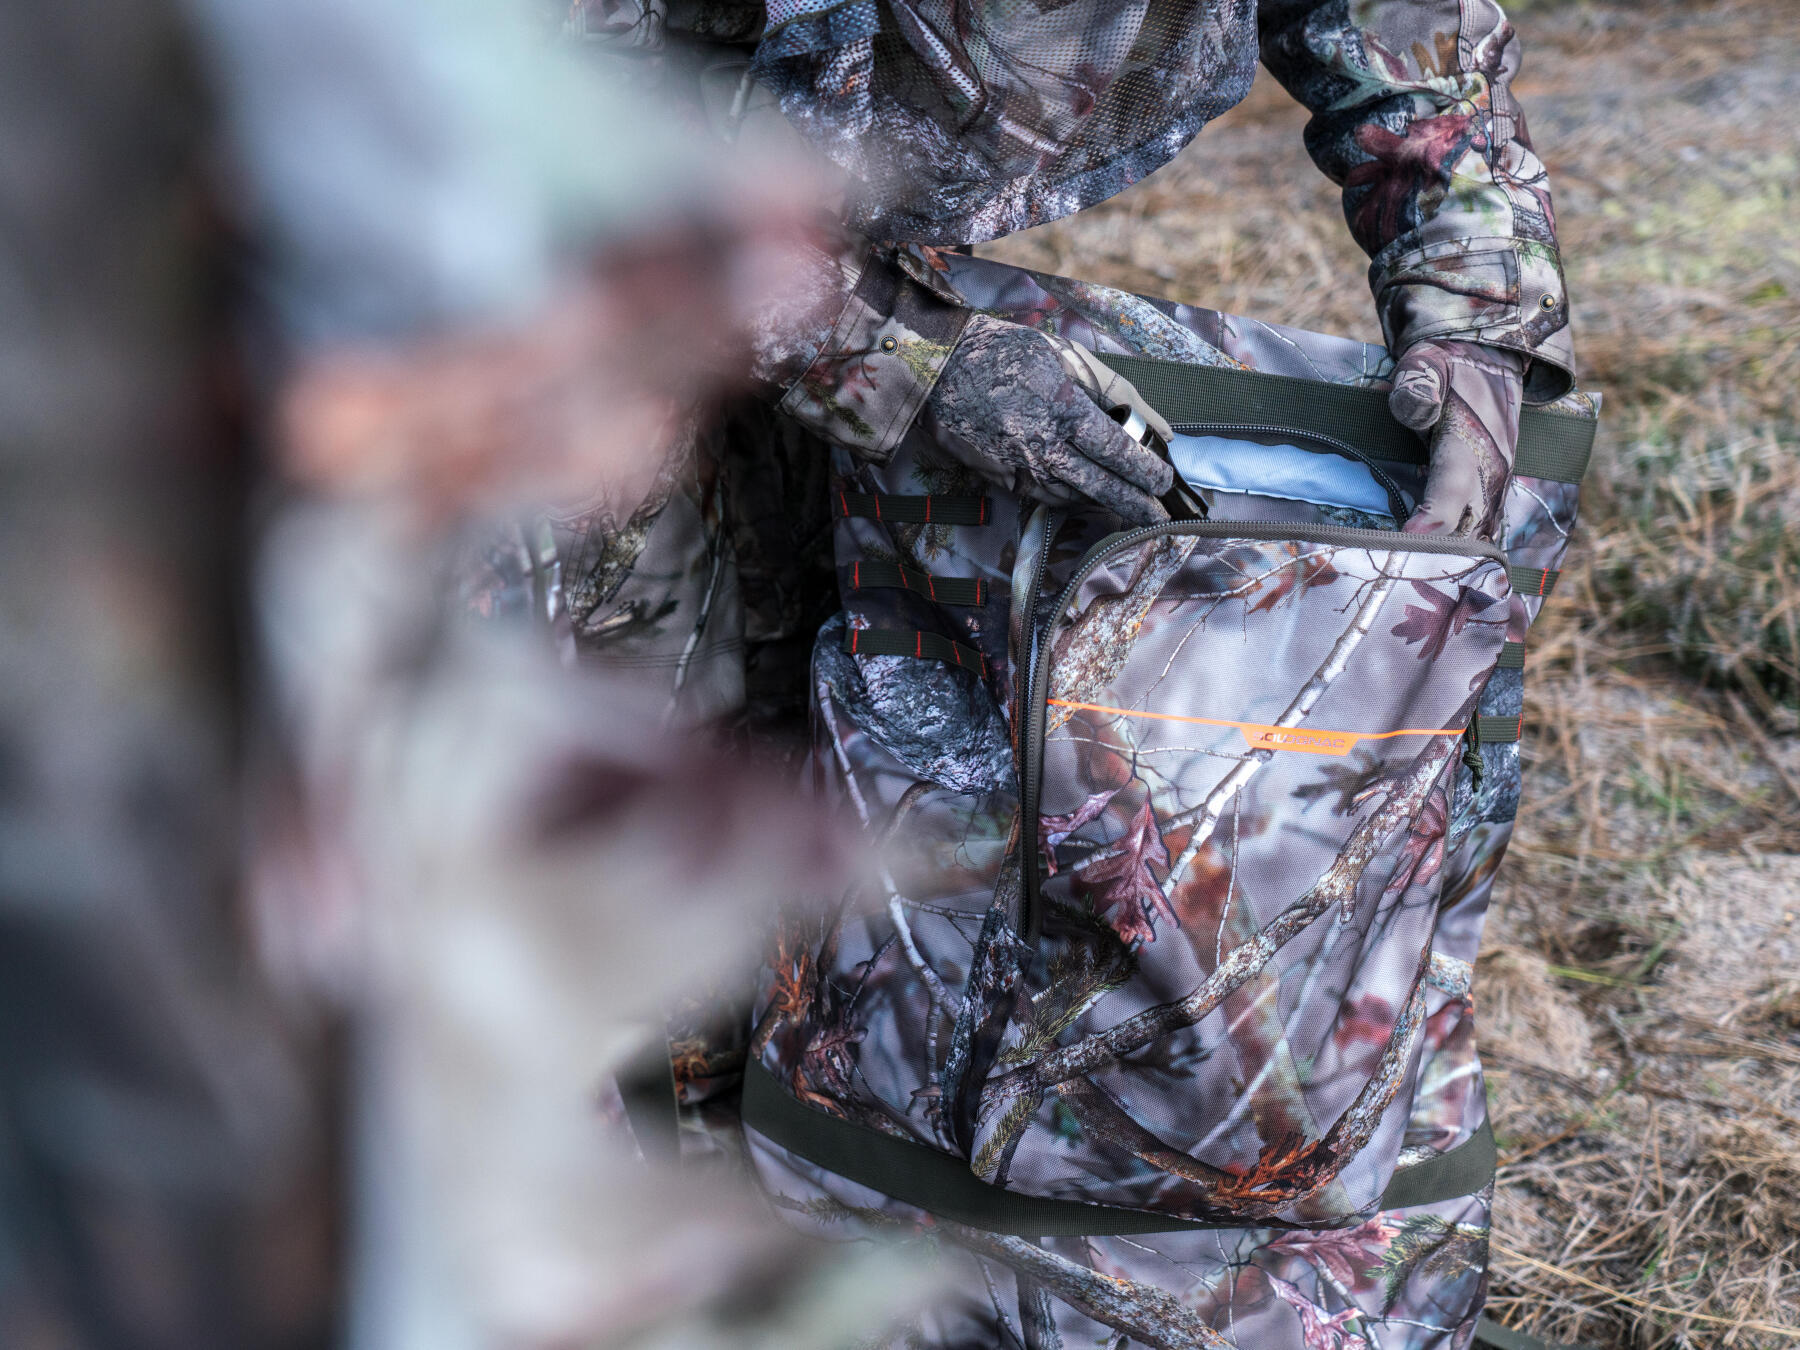 5 TIPS TO PREPARE FOR THE ARRIVAL OF GAME BIRDS